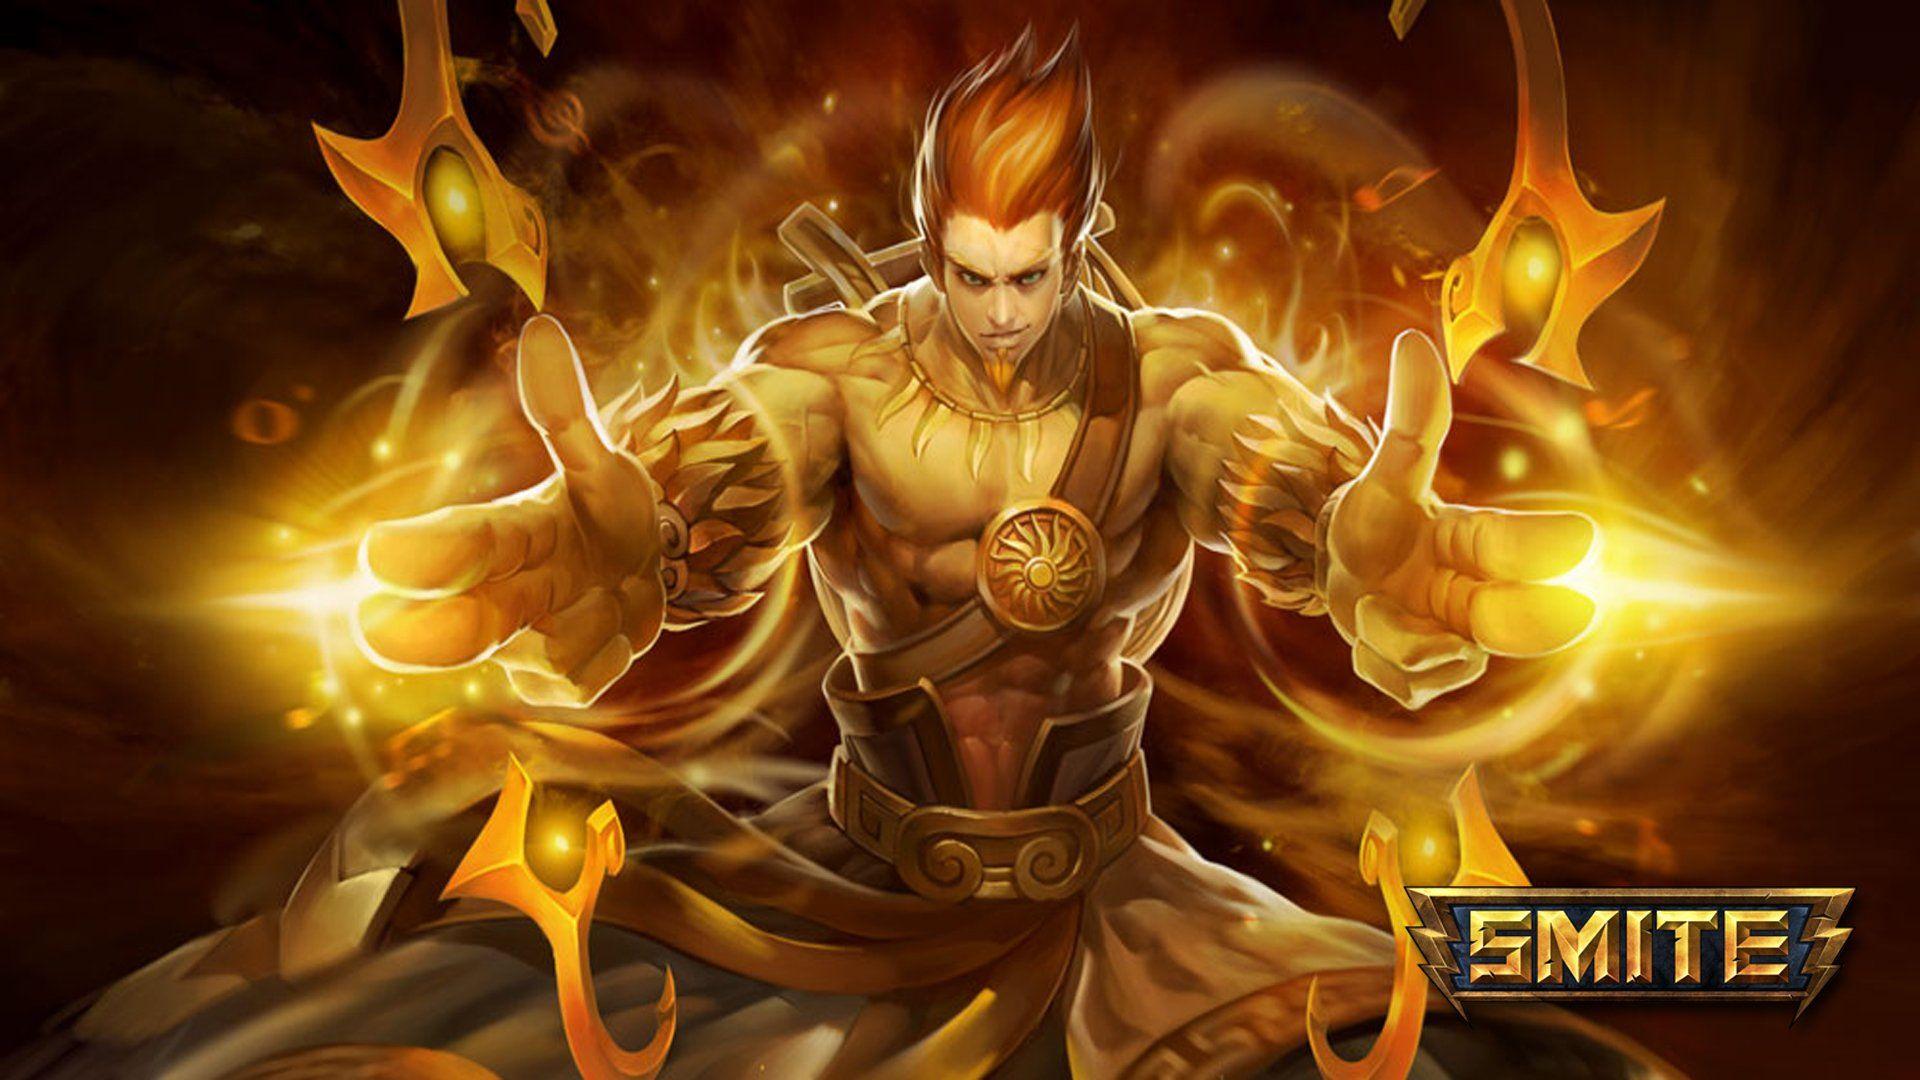 Smite Wallpaper Android Image Gallery